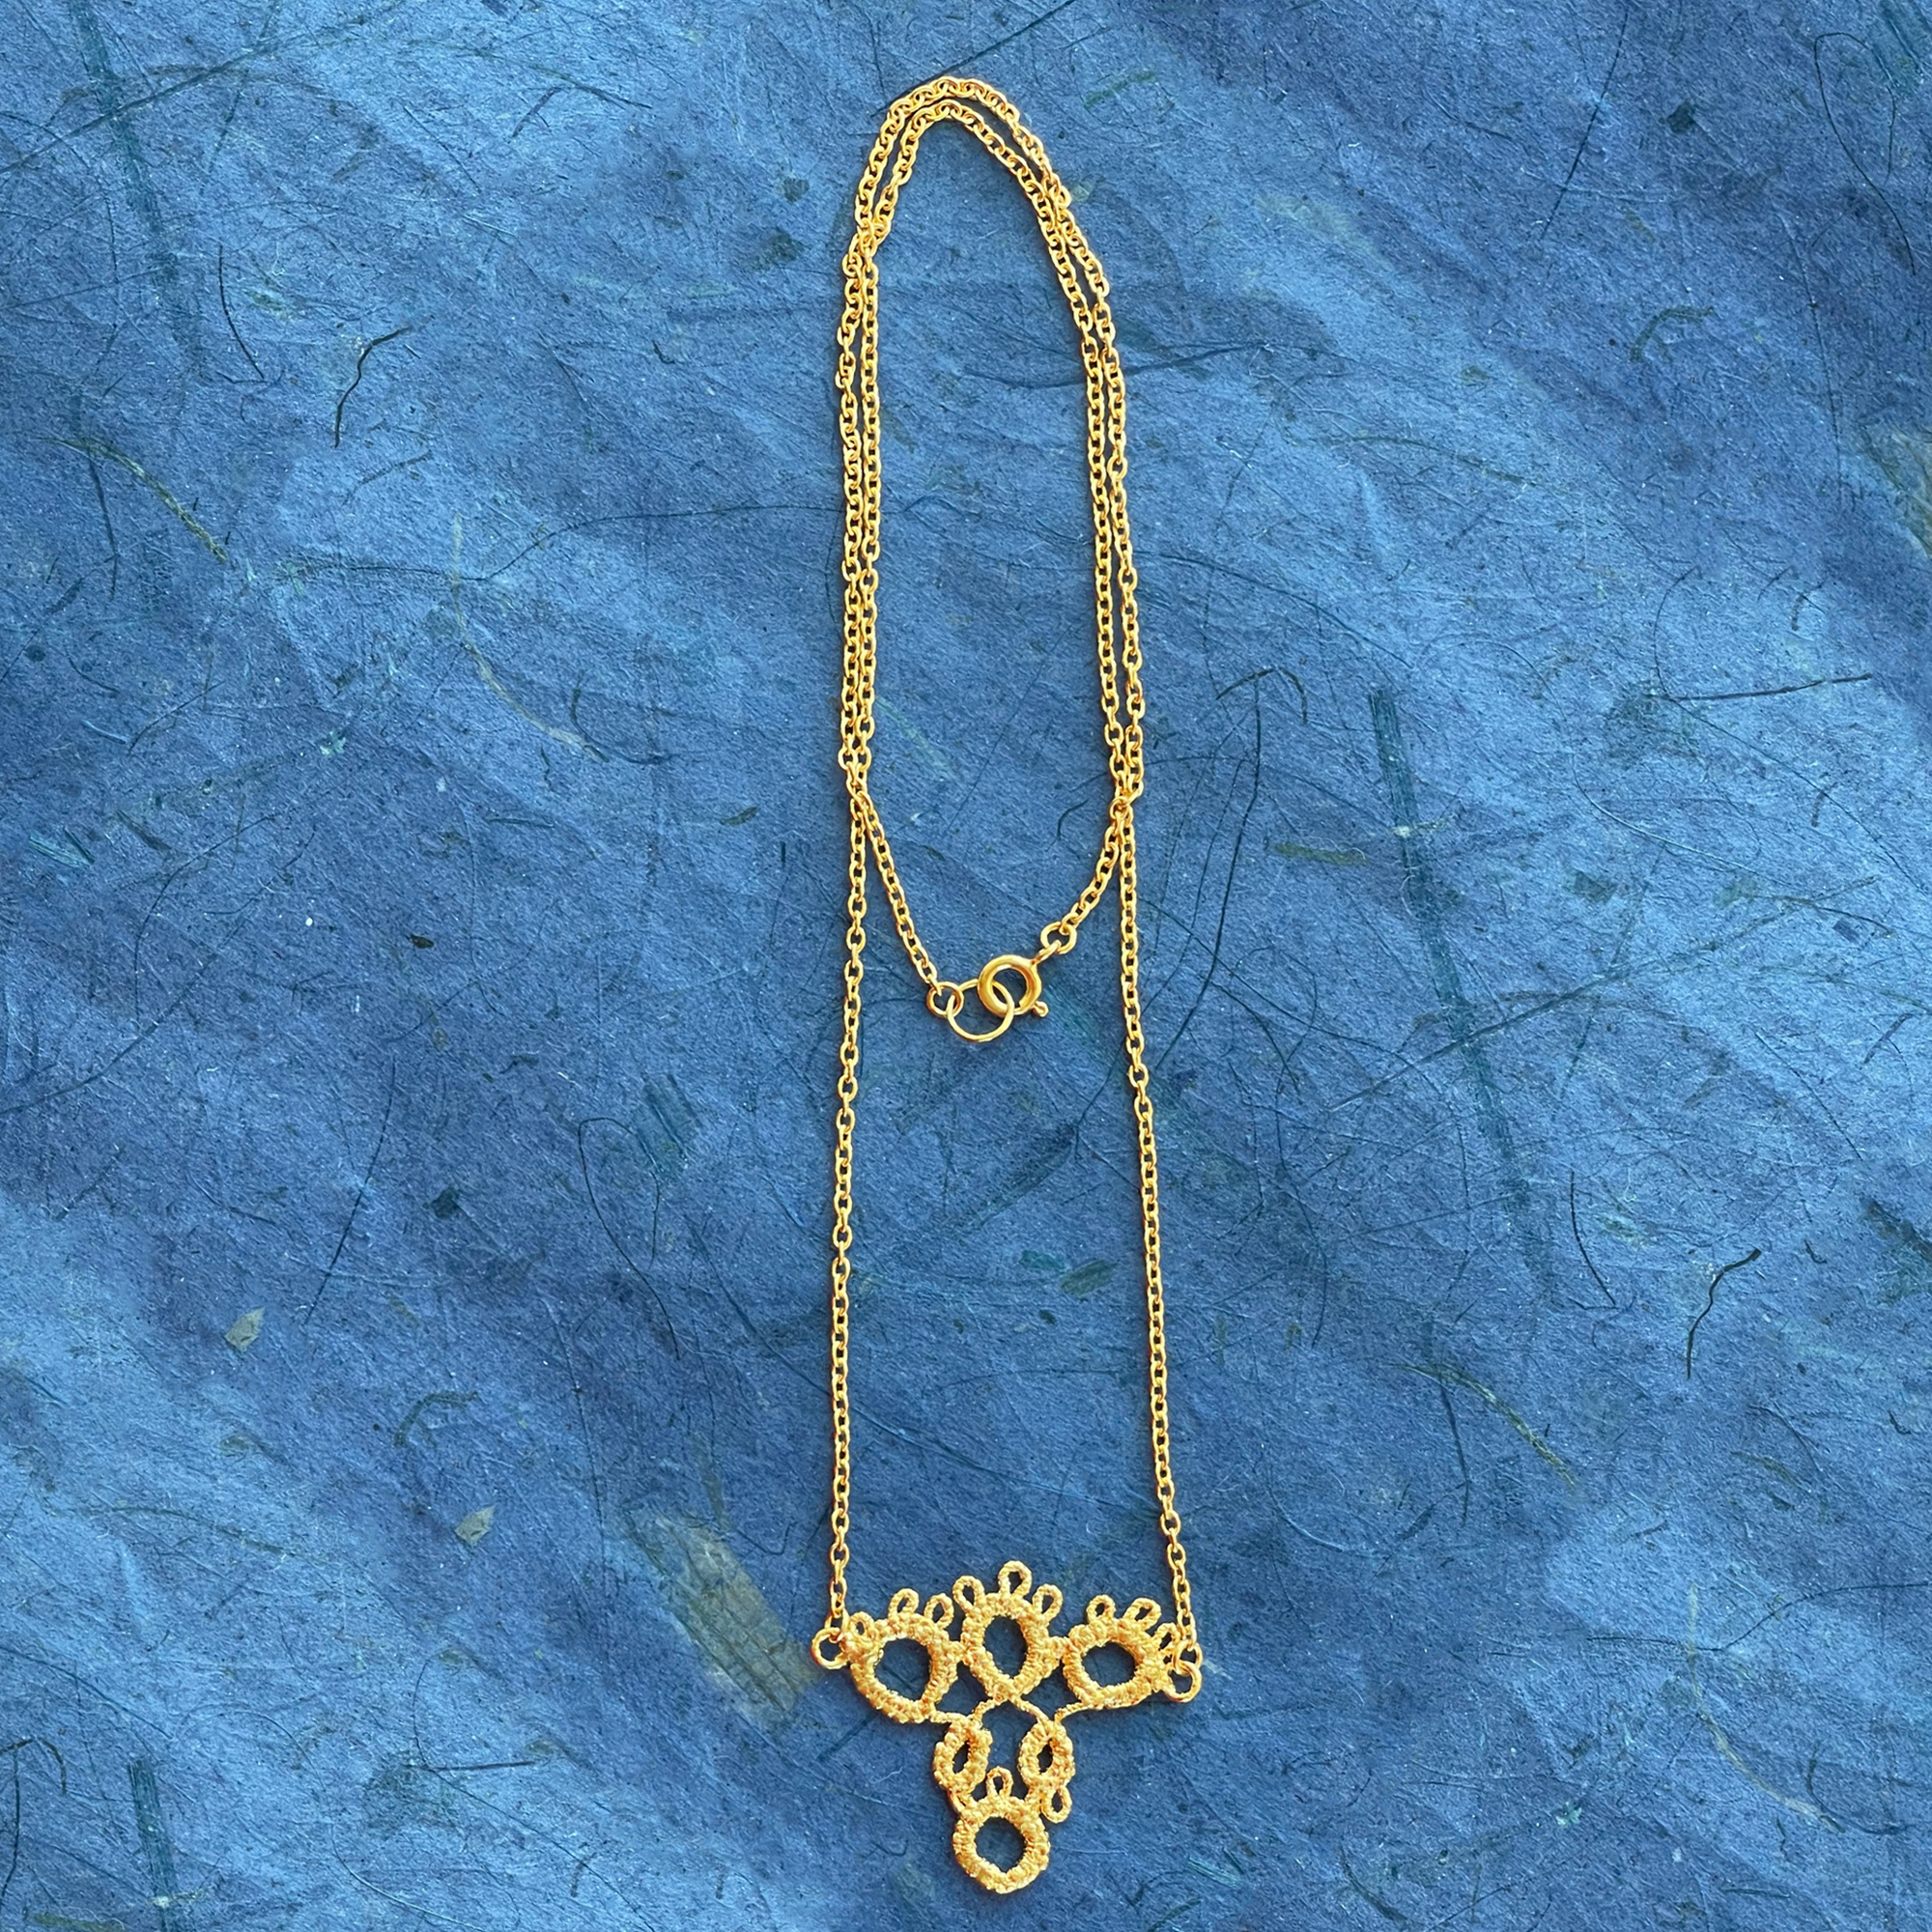 Irish tatted lace pendant necklace in 24k gold.